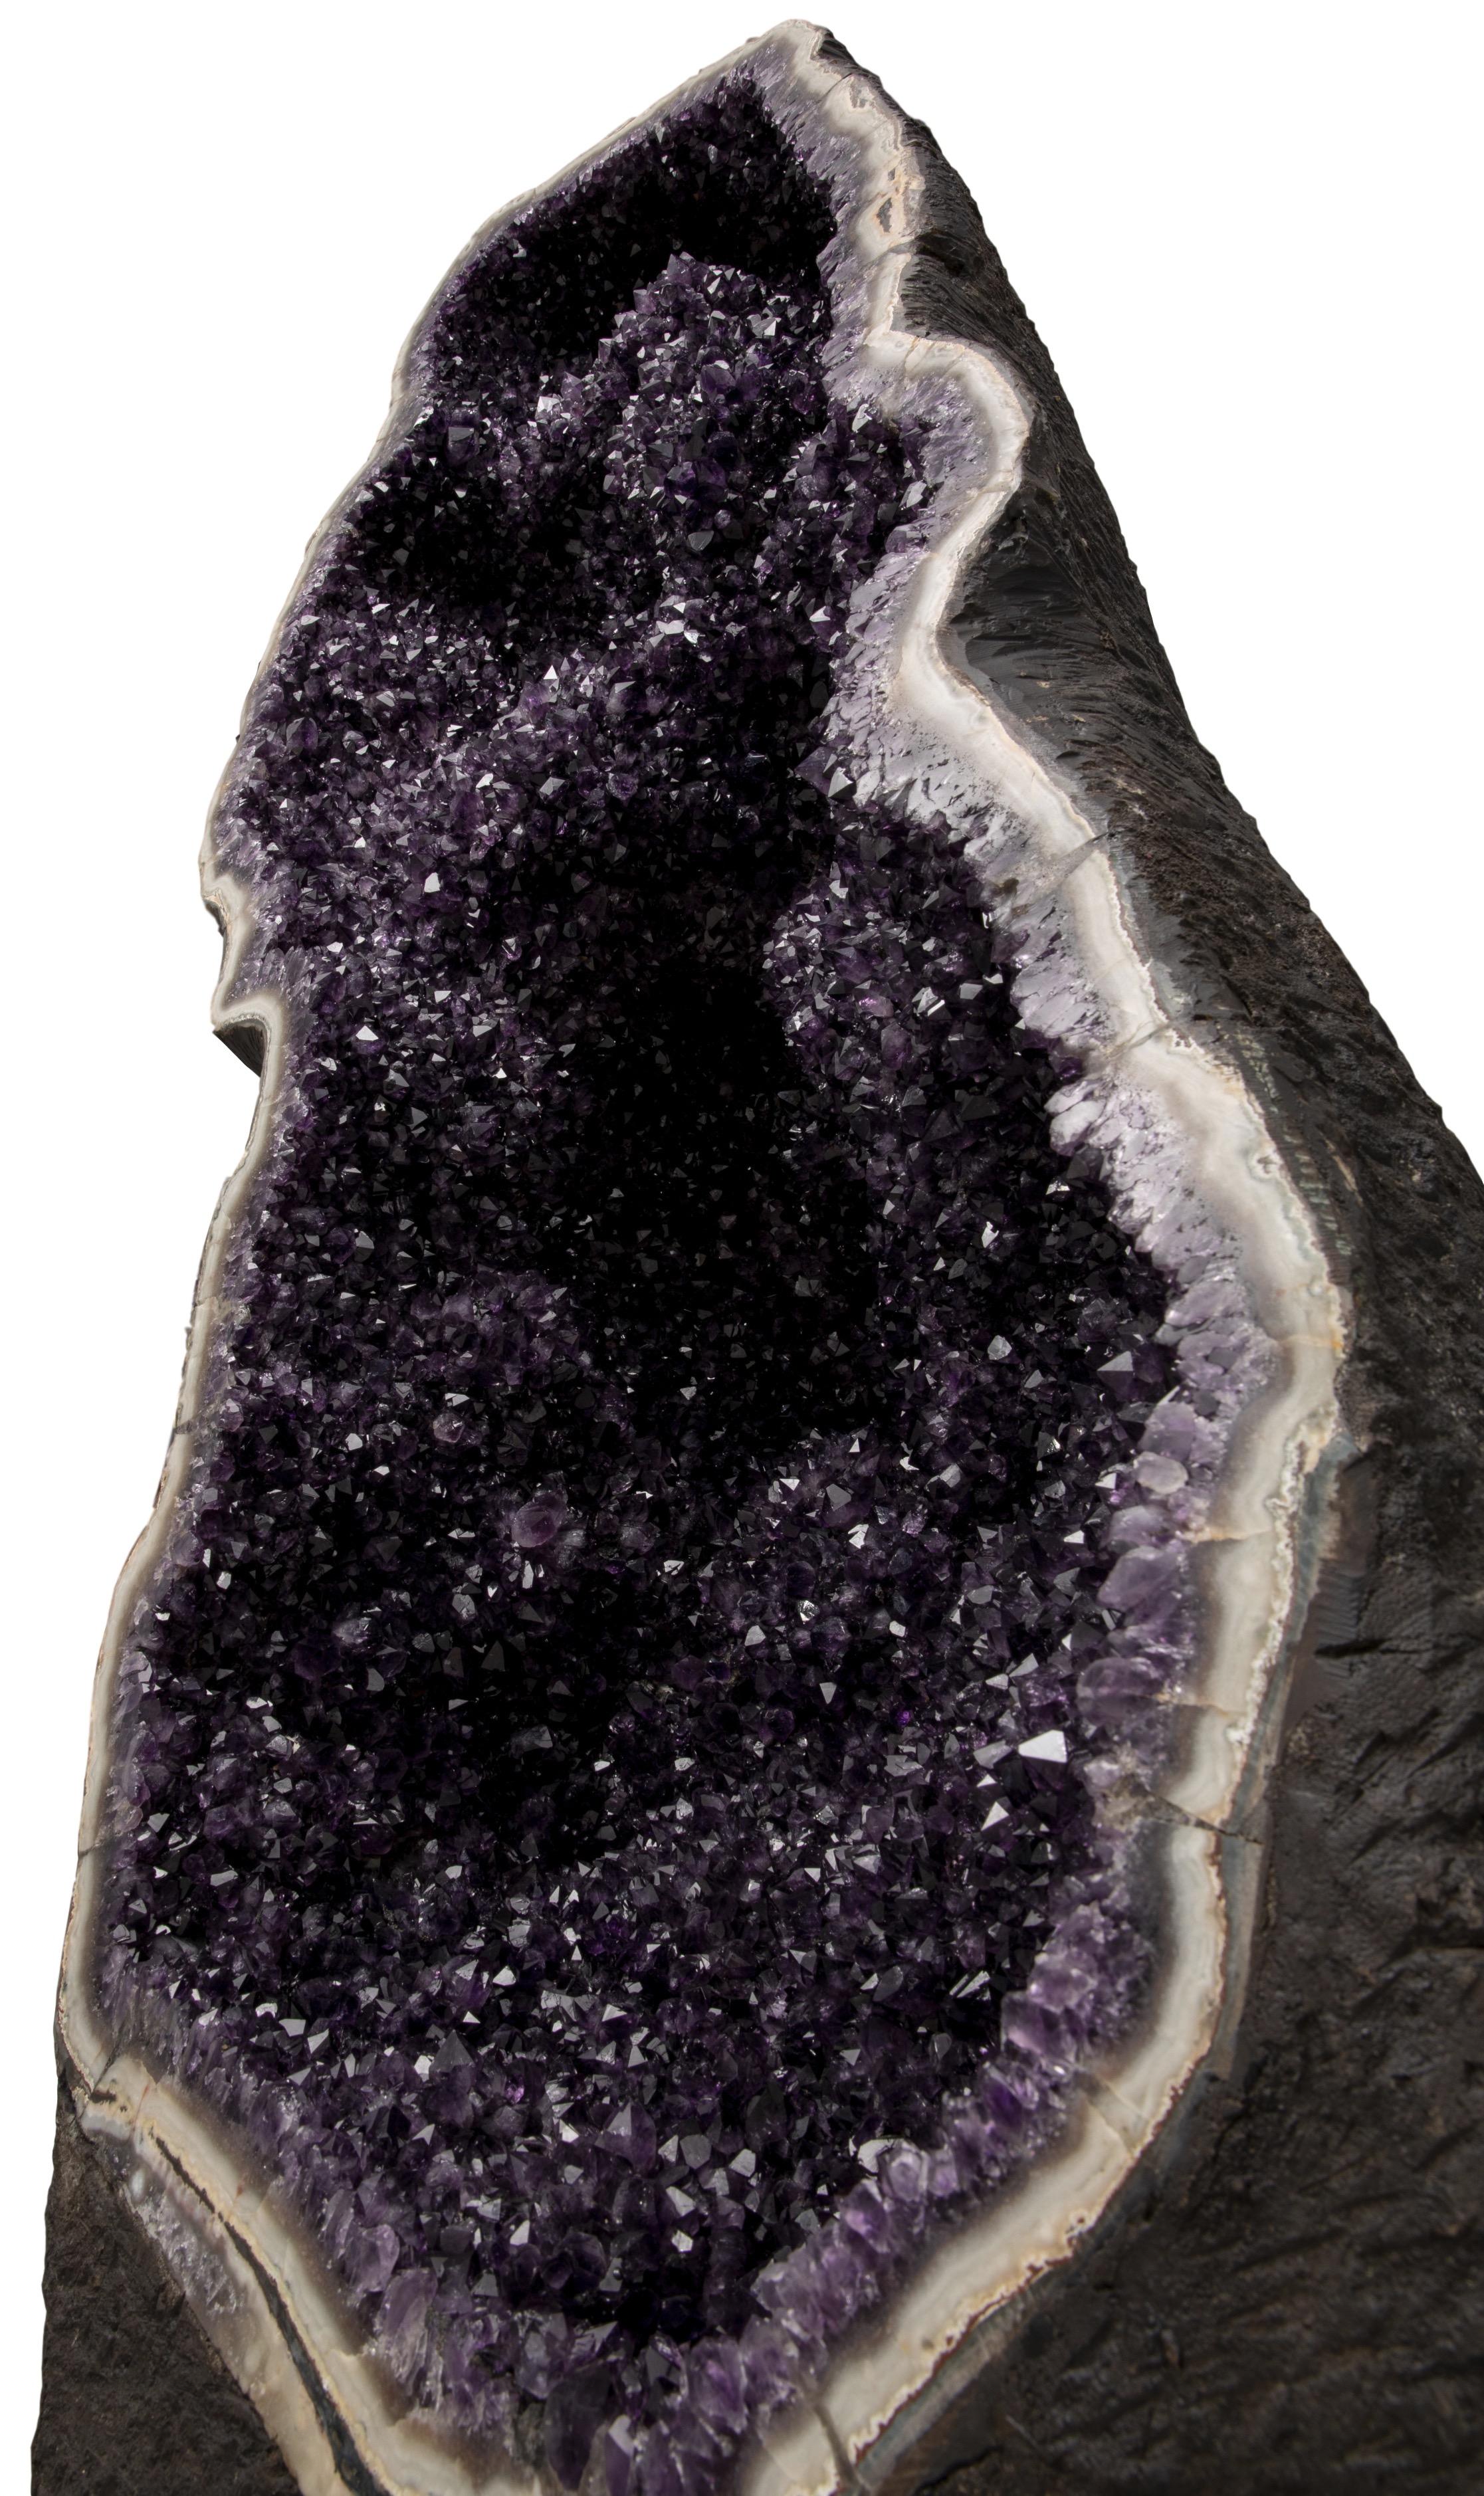 Incredible Deep Purple Amethyst Tower - Complete Half Geode with Agate border 5